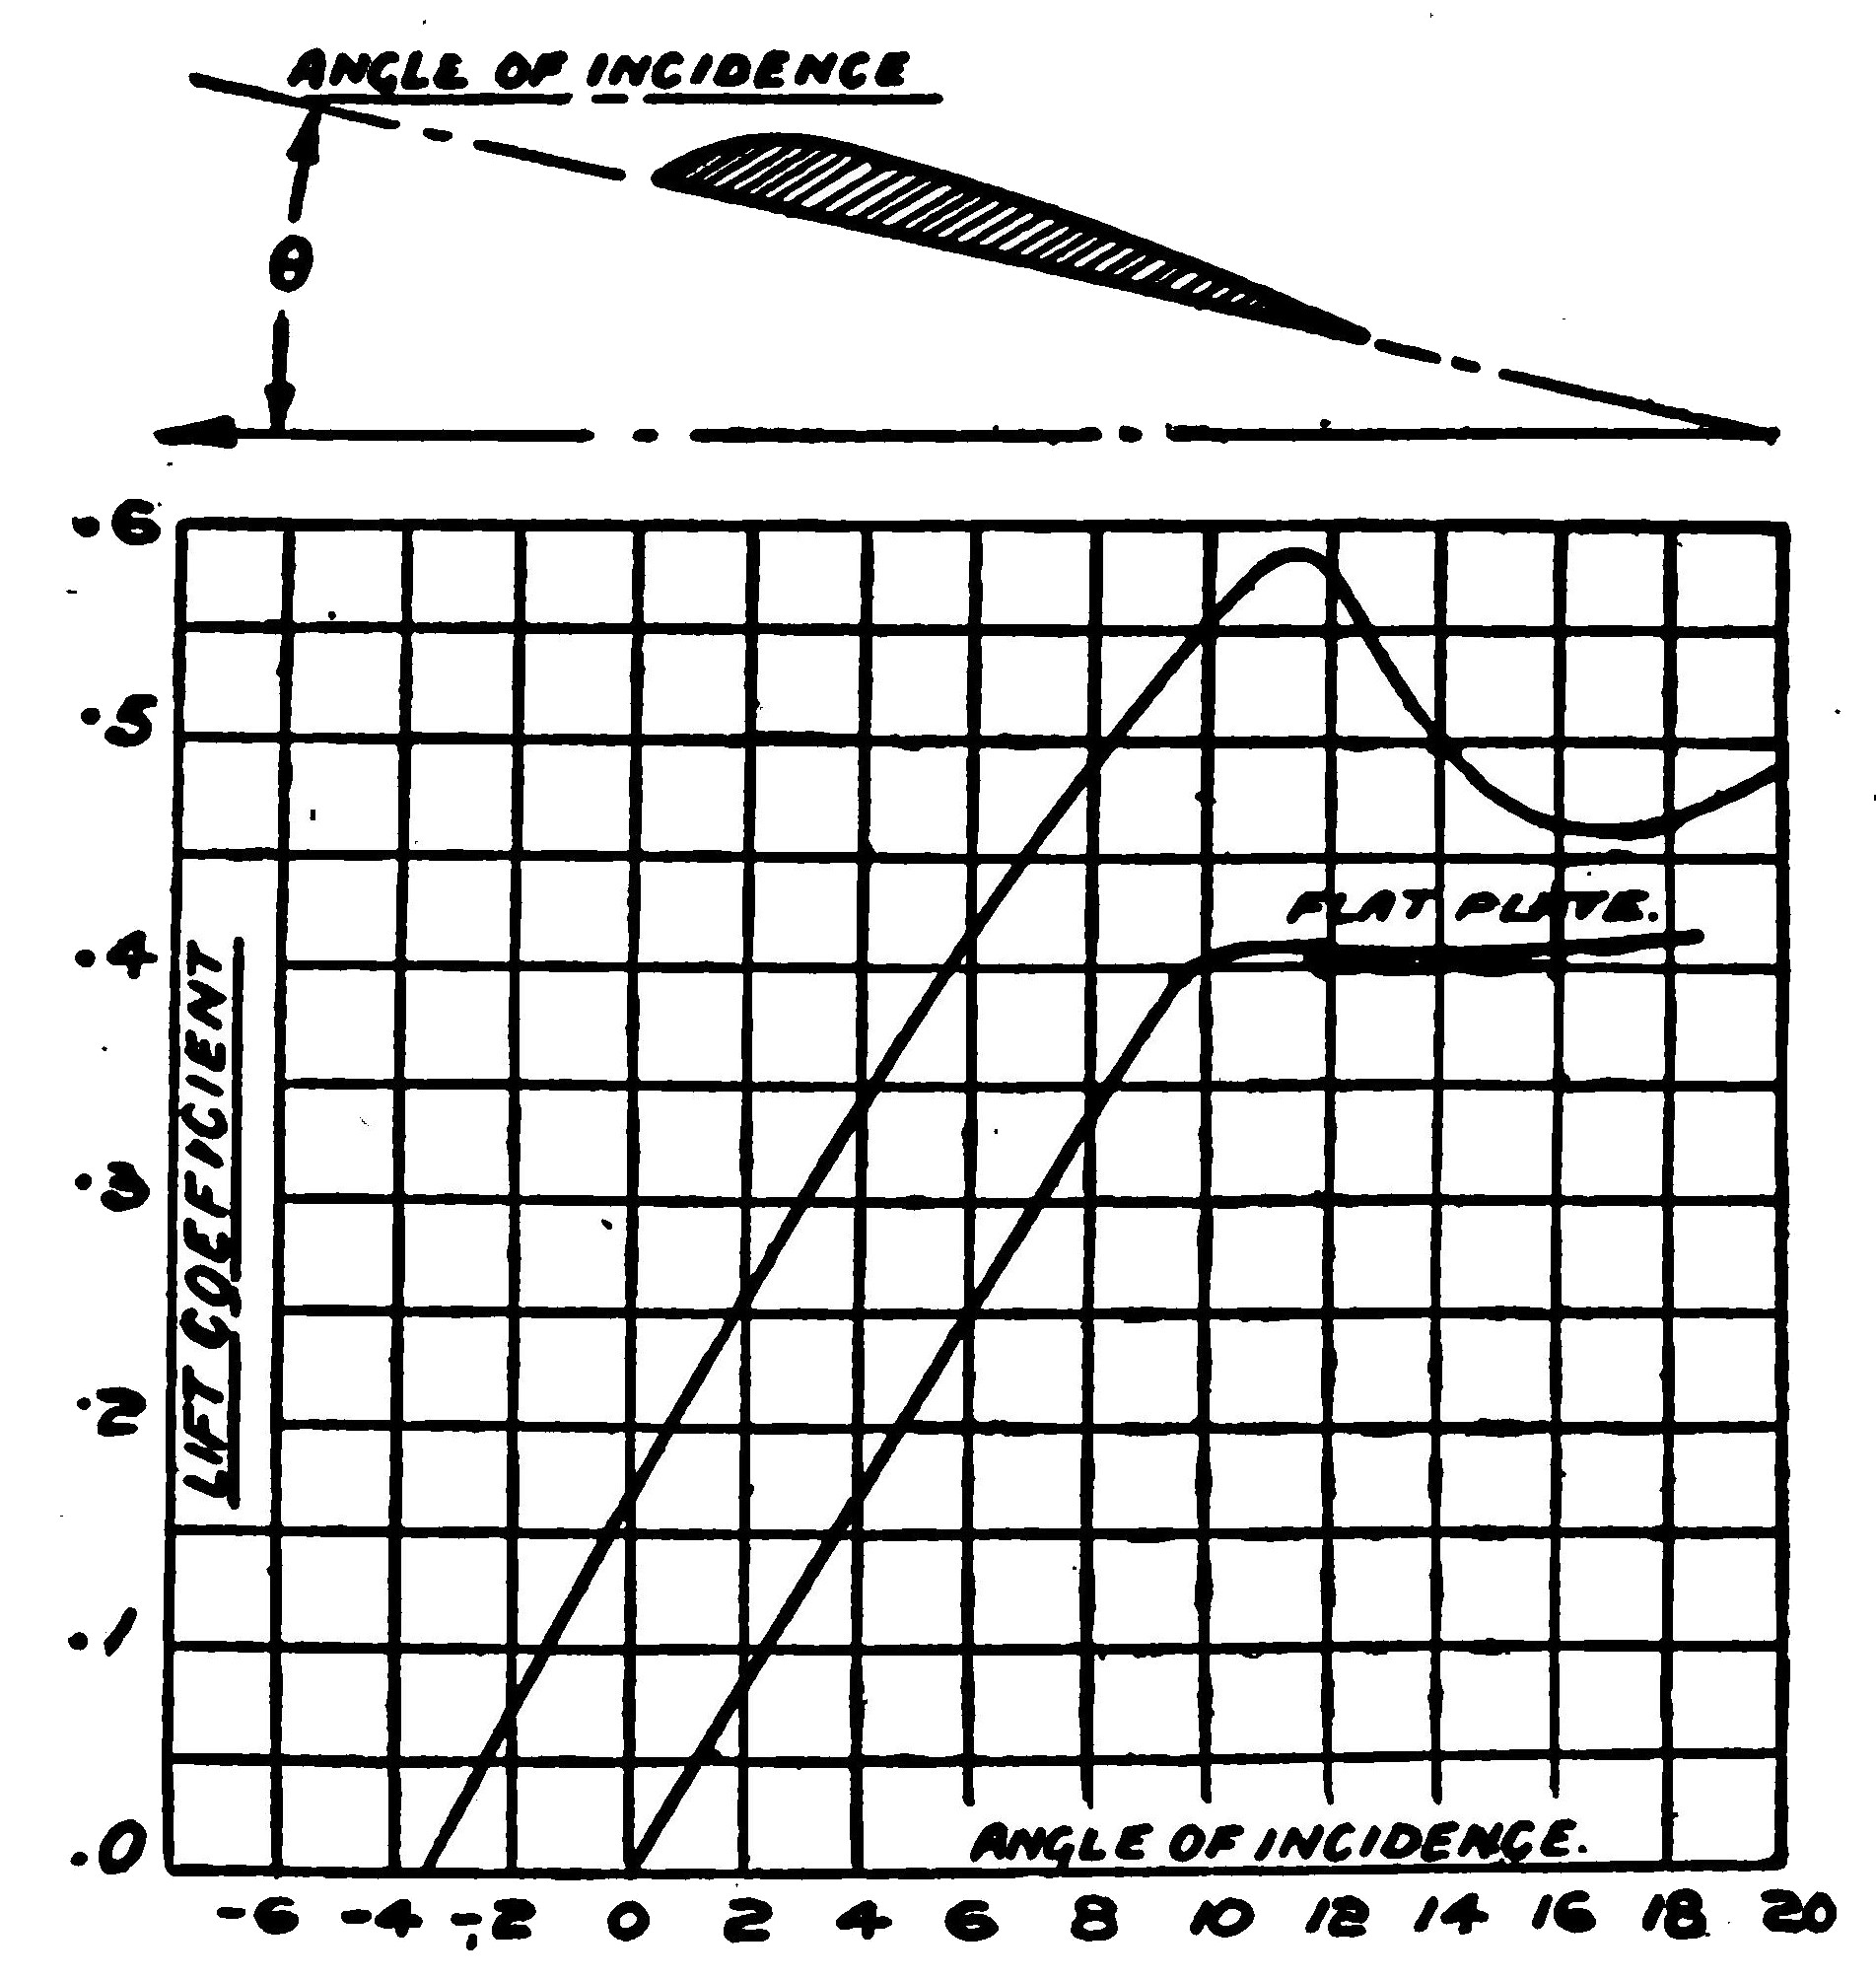 Fig. 3. Chart Showing Relation Between Incidence And Lift.